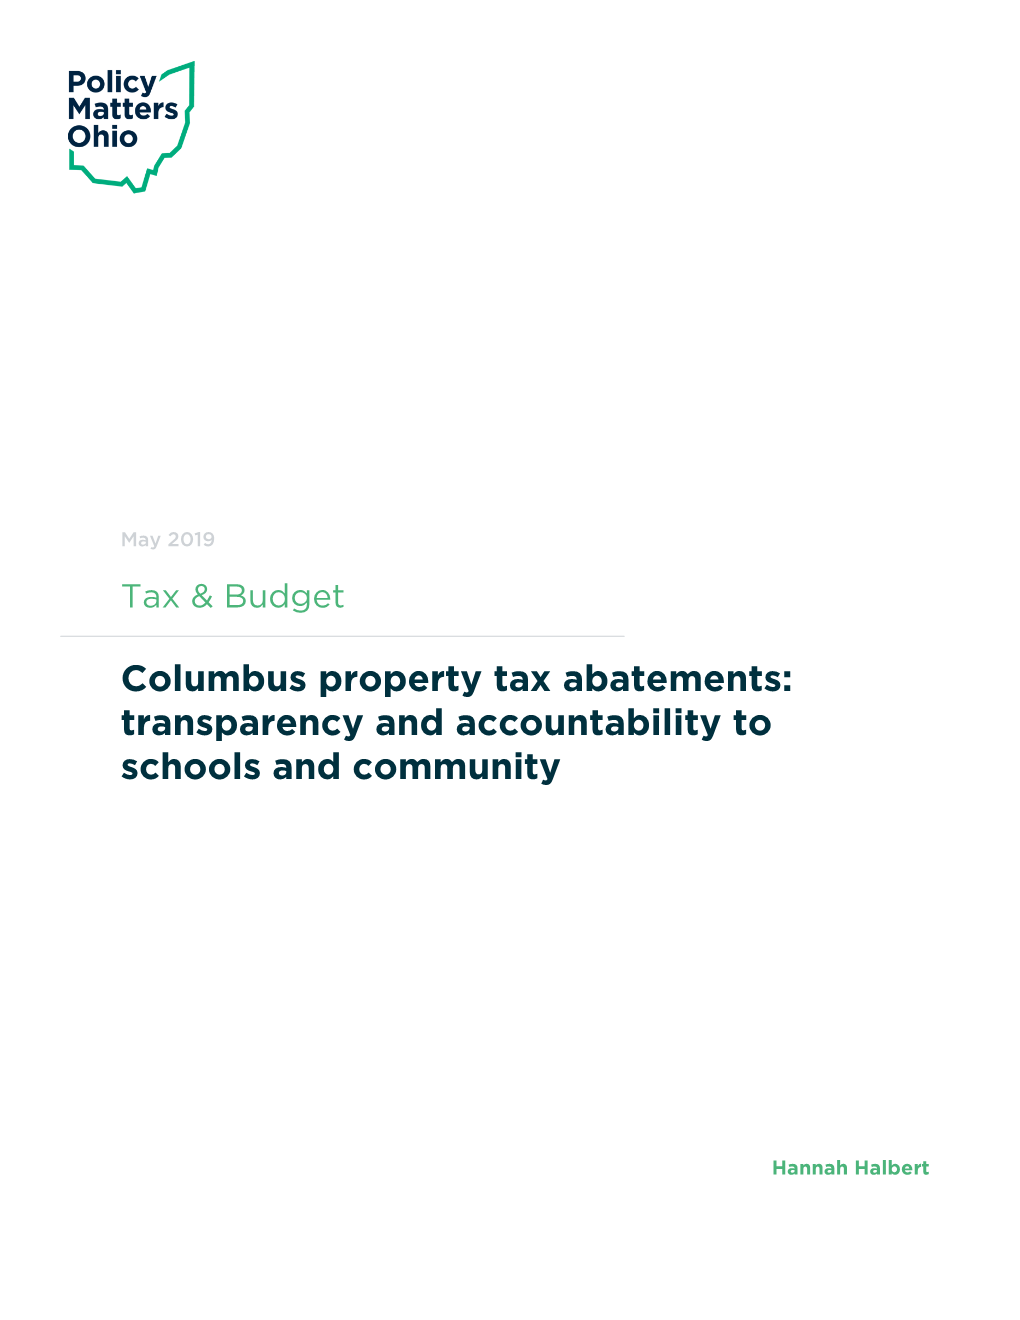 Columbus Property Tax Abatements: Transparency and Accountability to Schools and Community